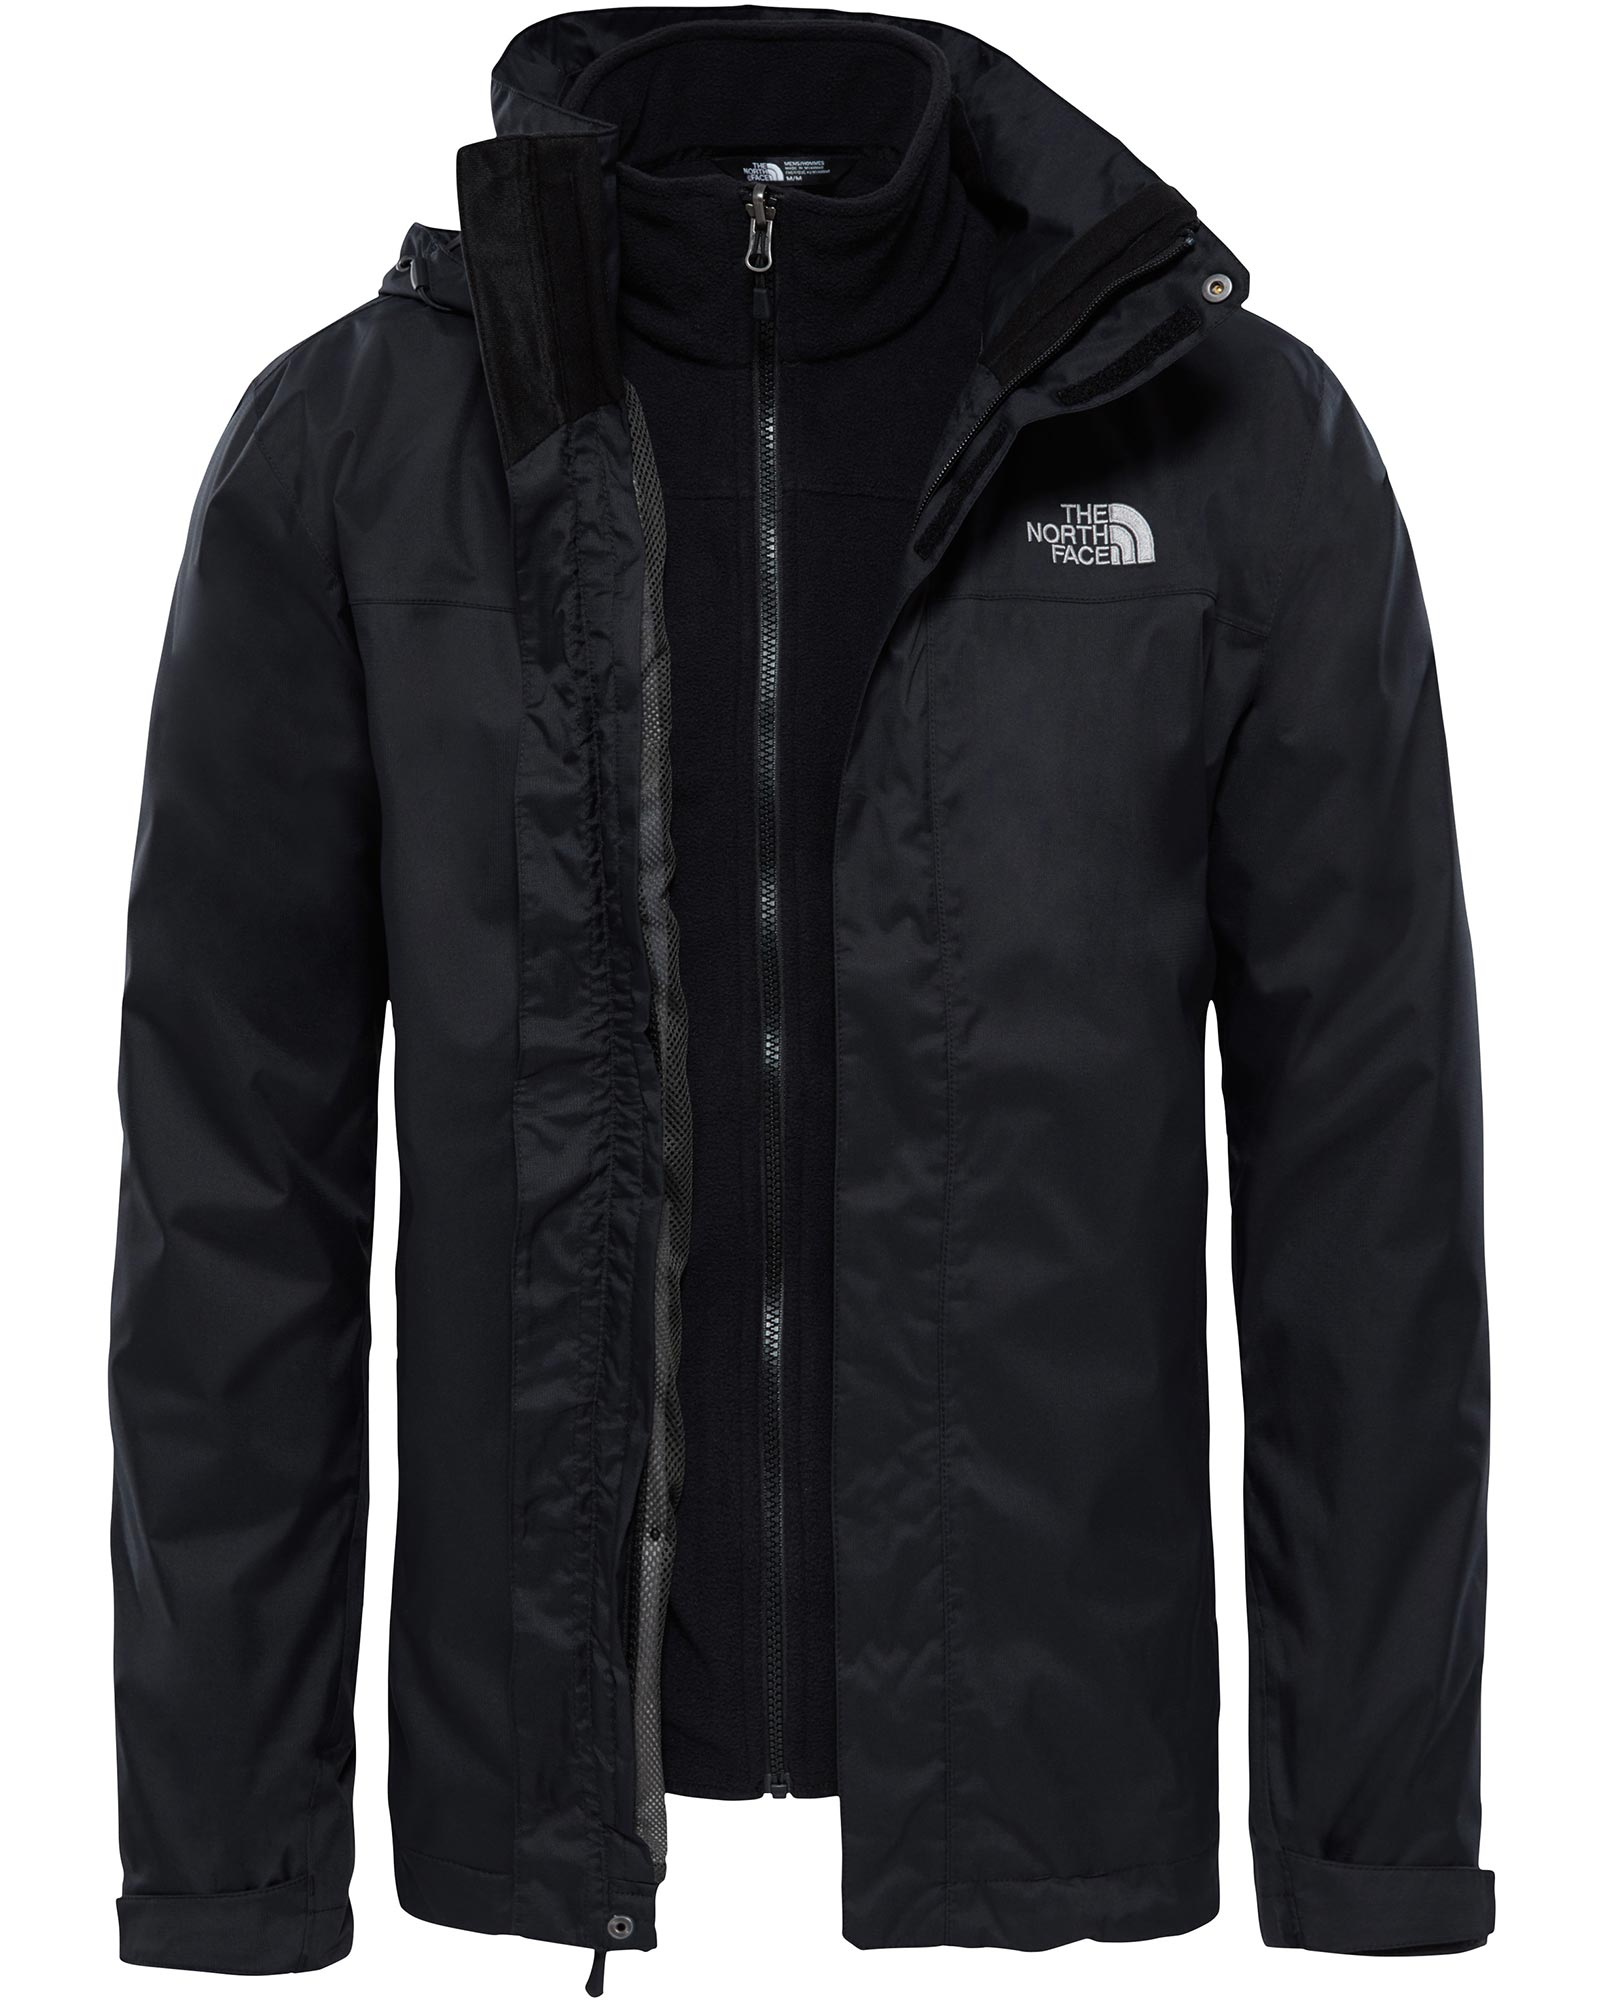 The North Face Evolve Triclimate Men’s Jacket - TNF Black XXL